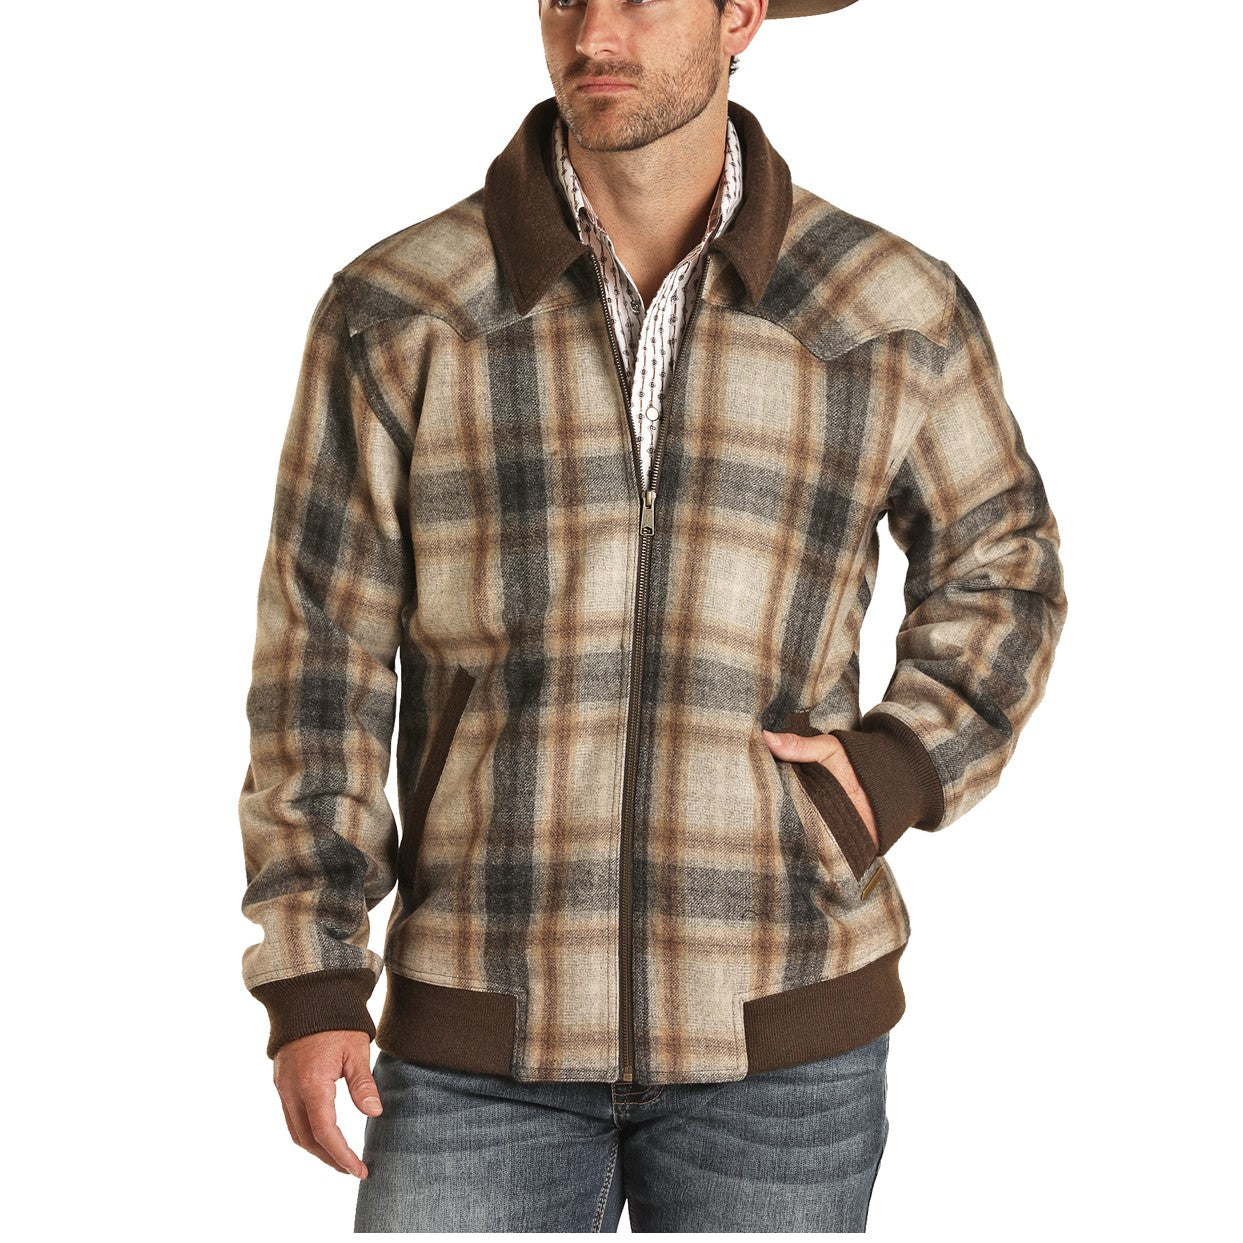 Powder River Outfitters Men's Brown & Beige Plaid Wool Coat 92-1008-23